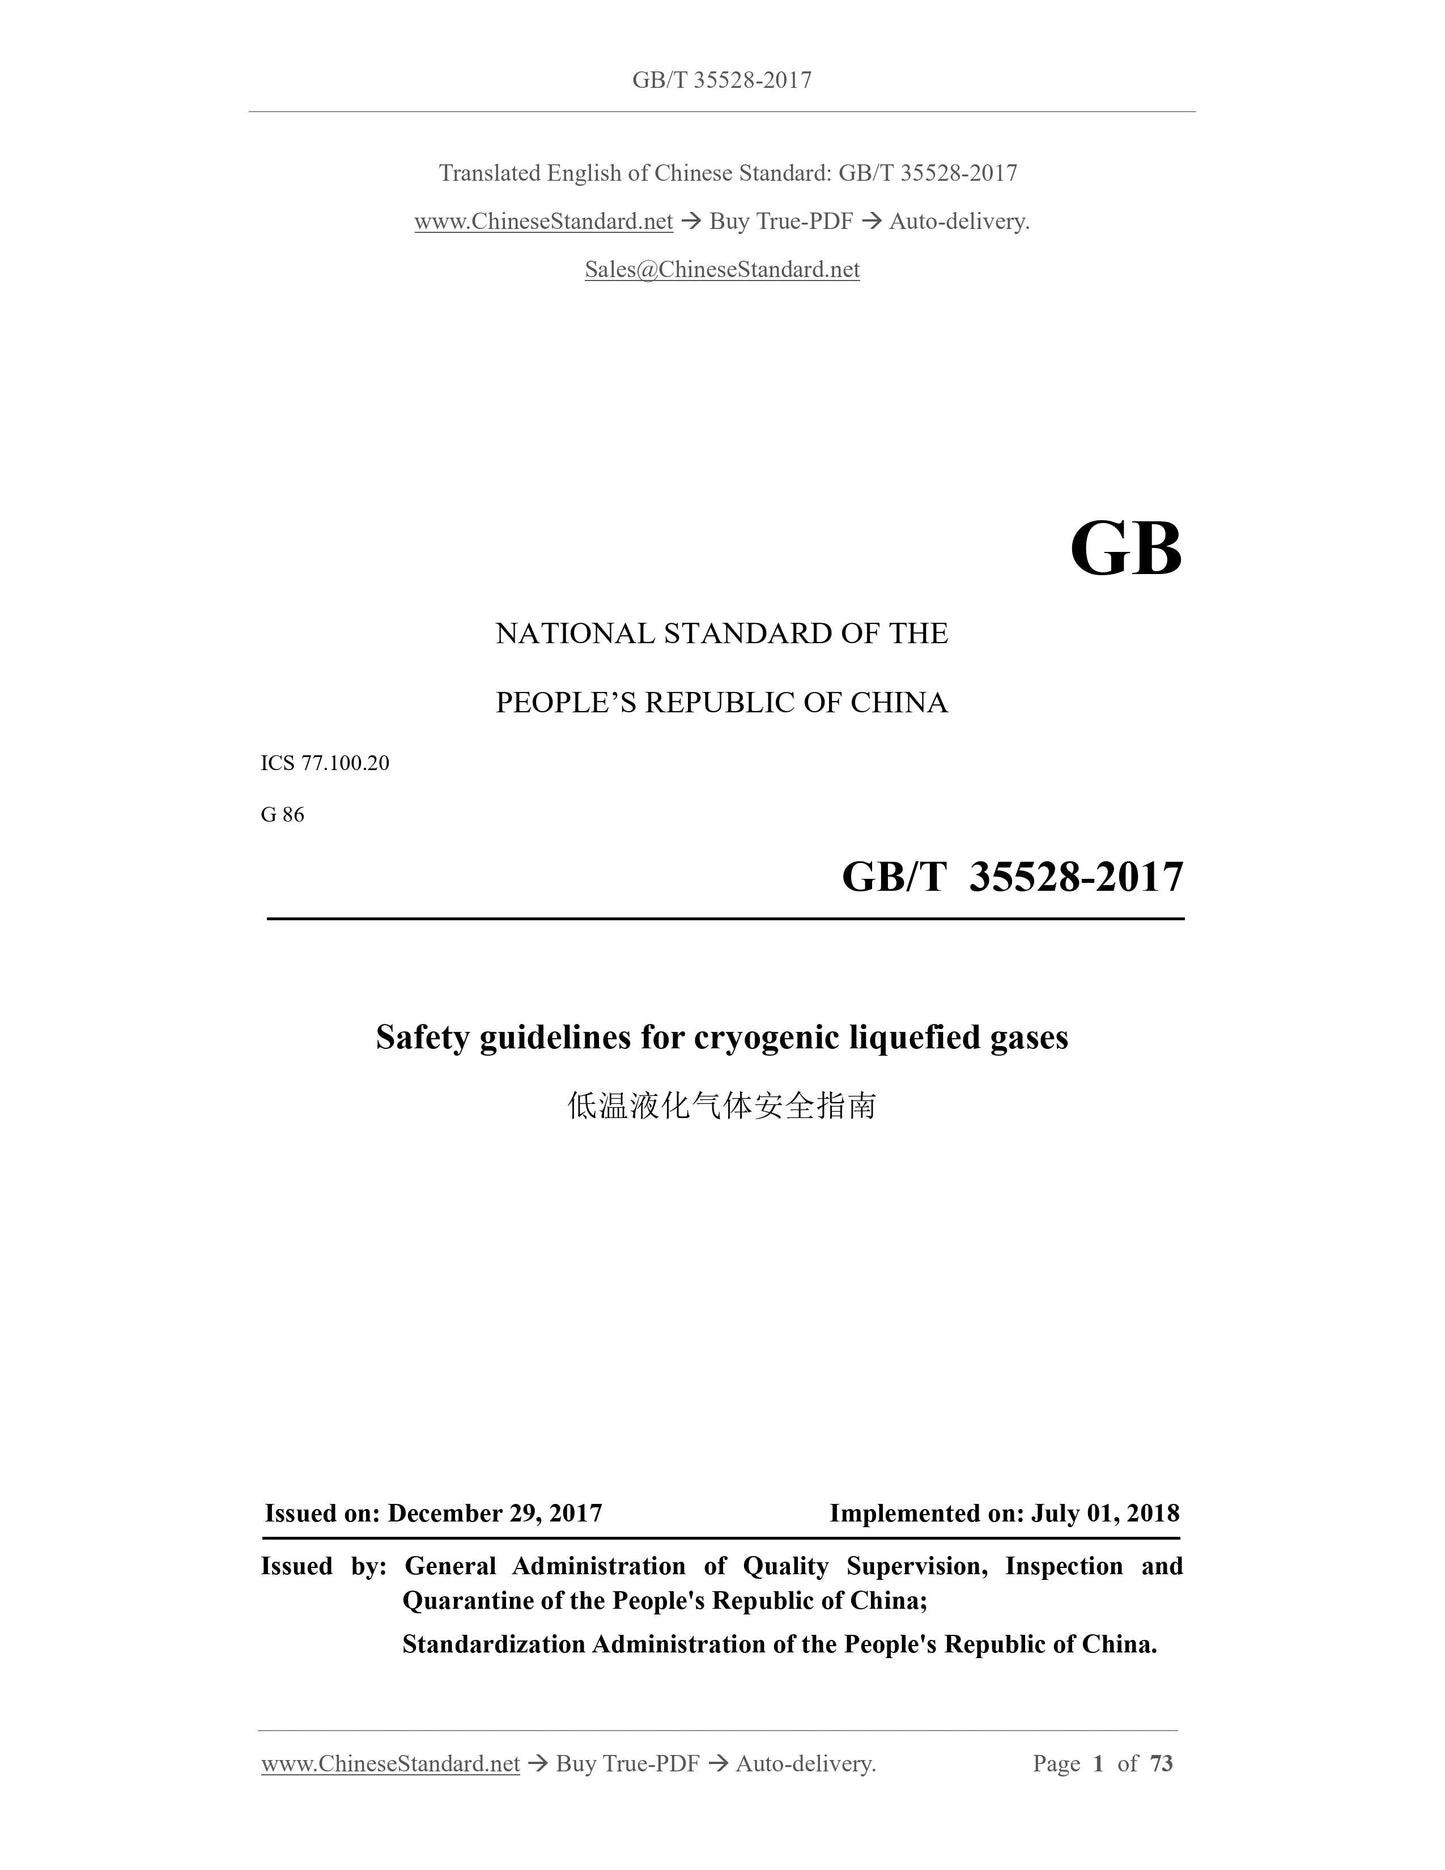 GB/T 35528-2017 Page 1